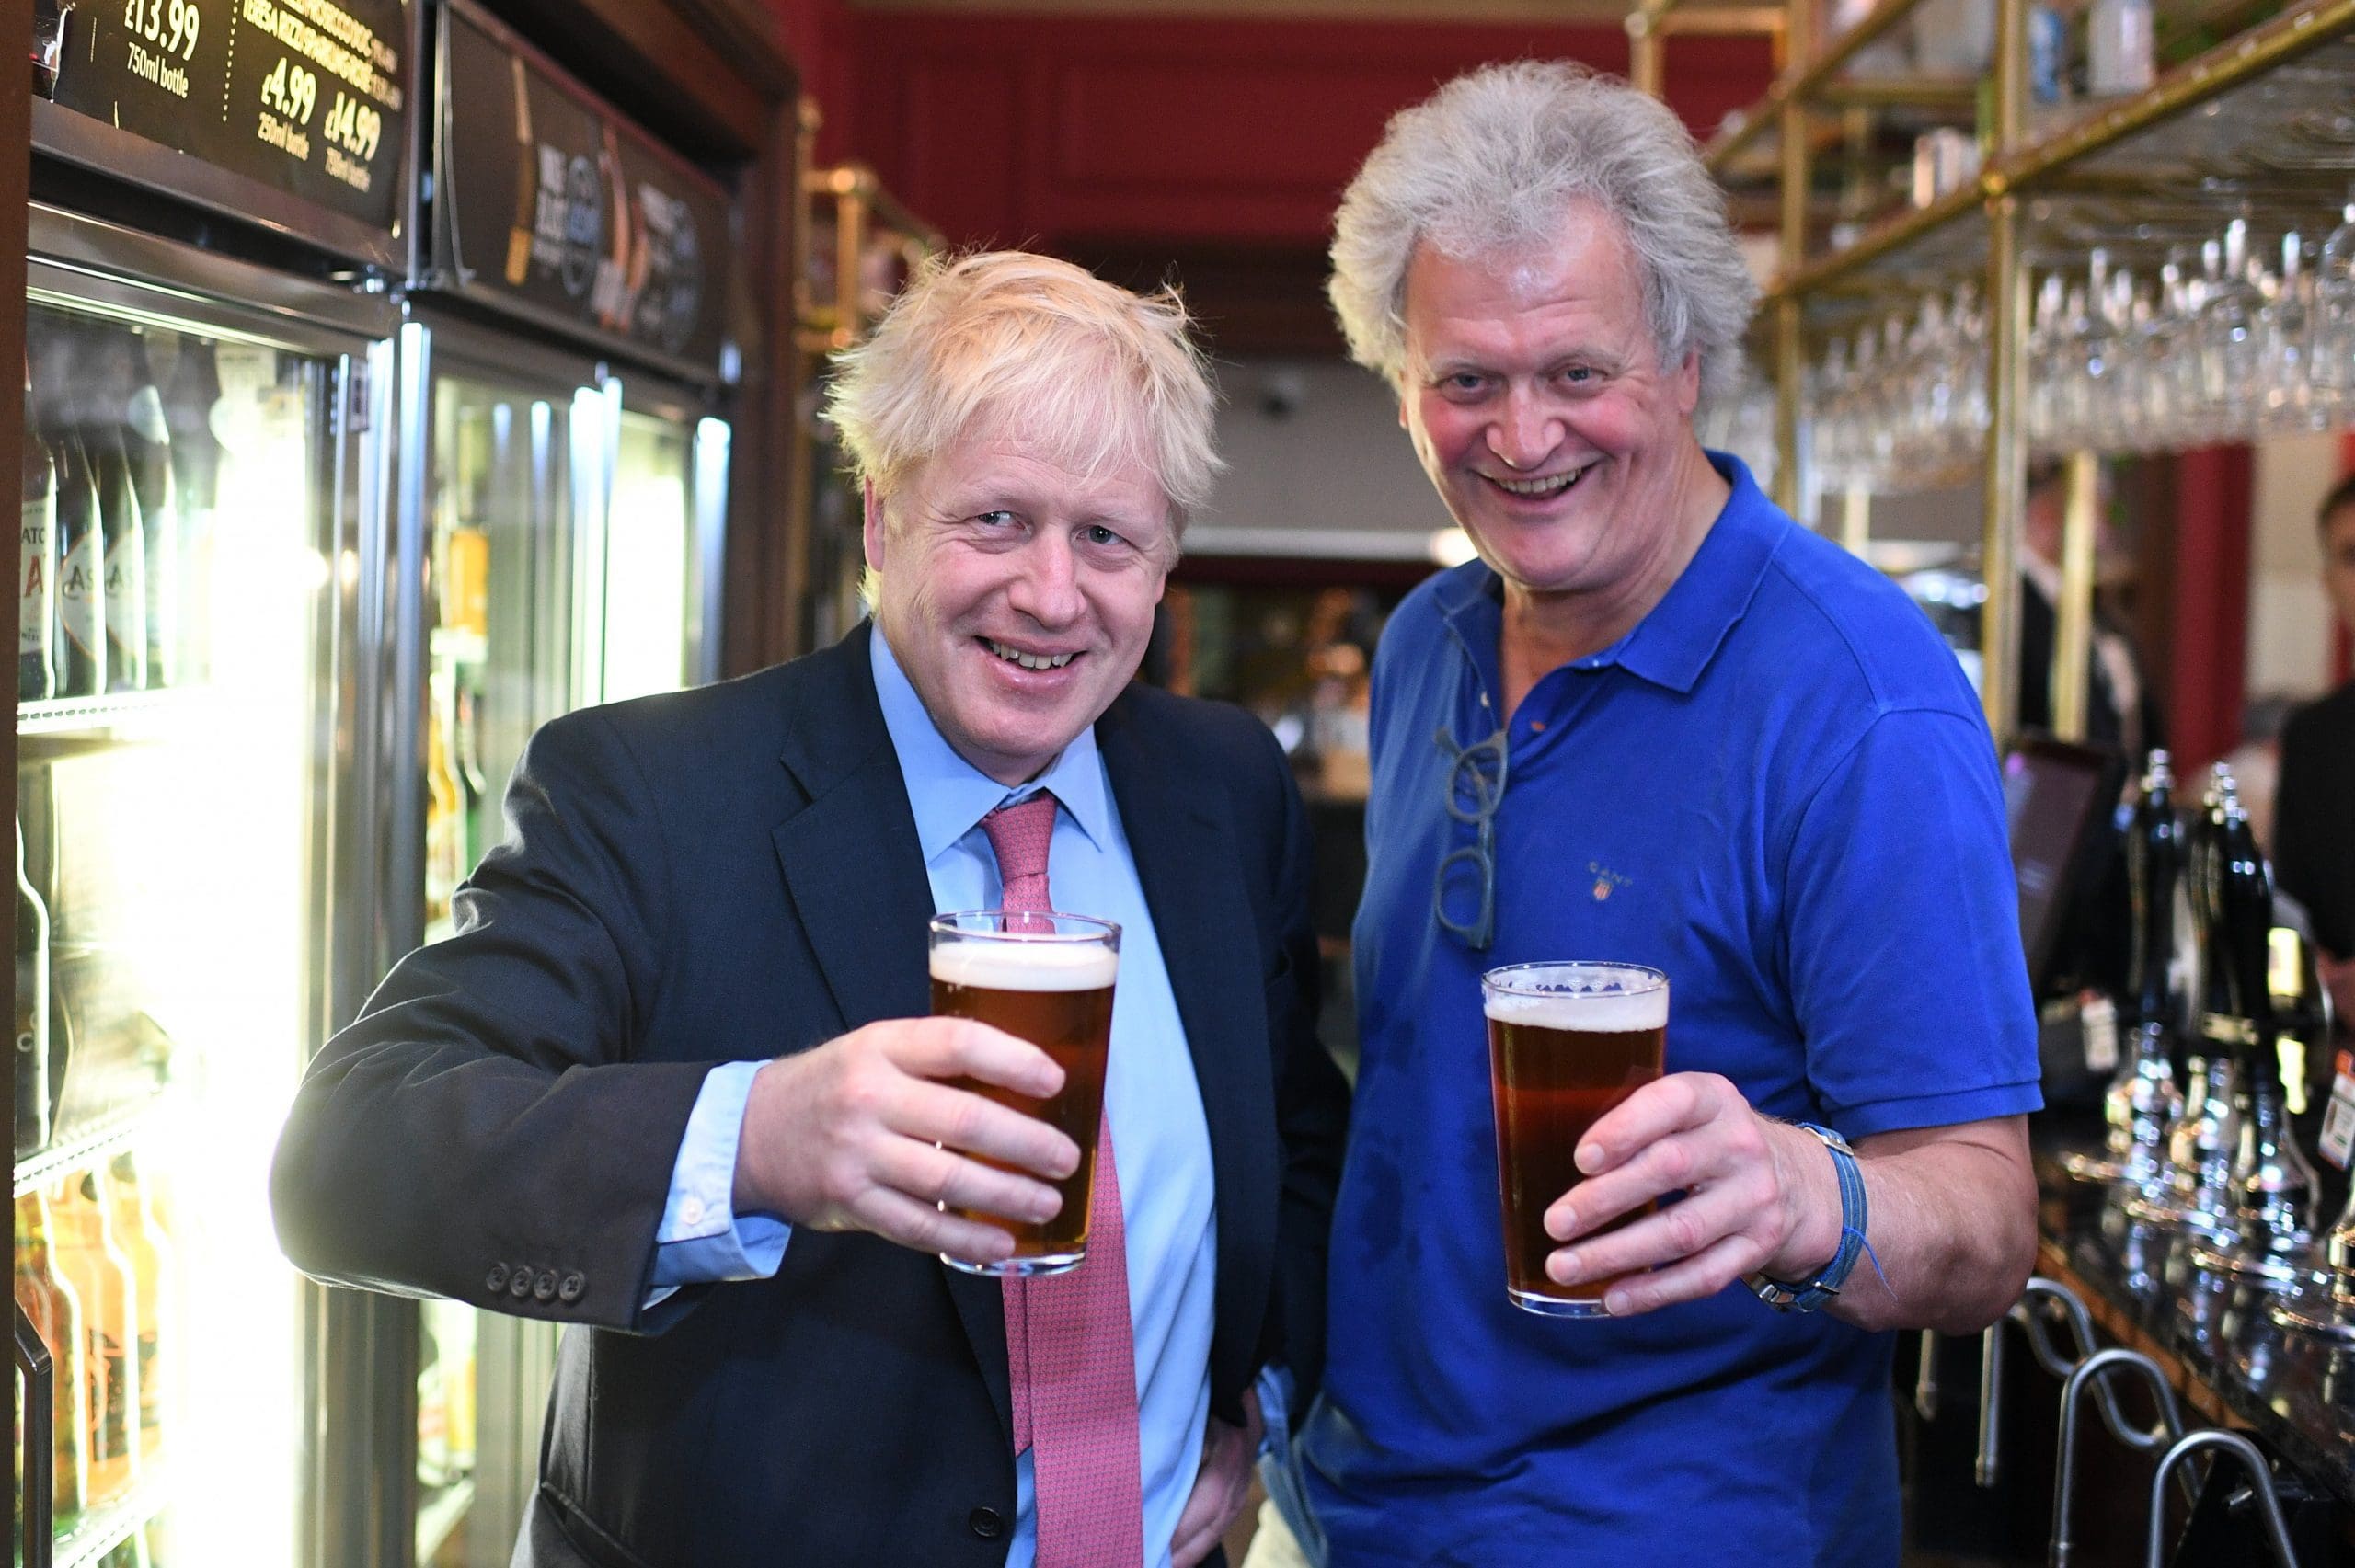 wetherspoons-boss-attacks-government’s-“lockdown-by-stealth”